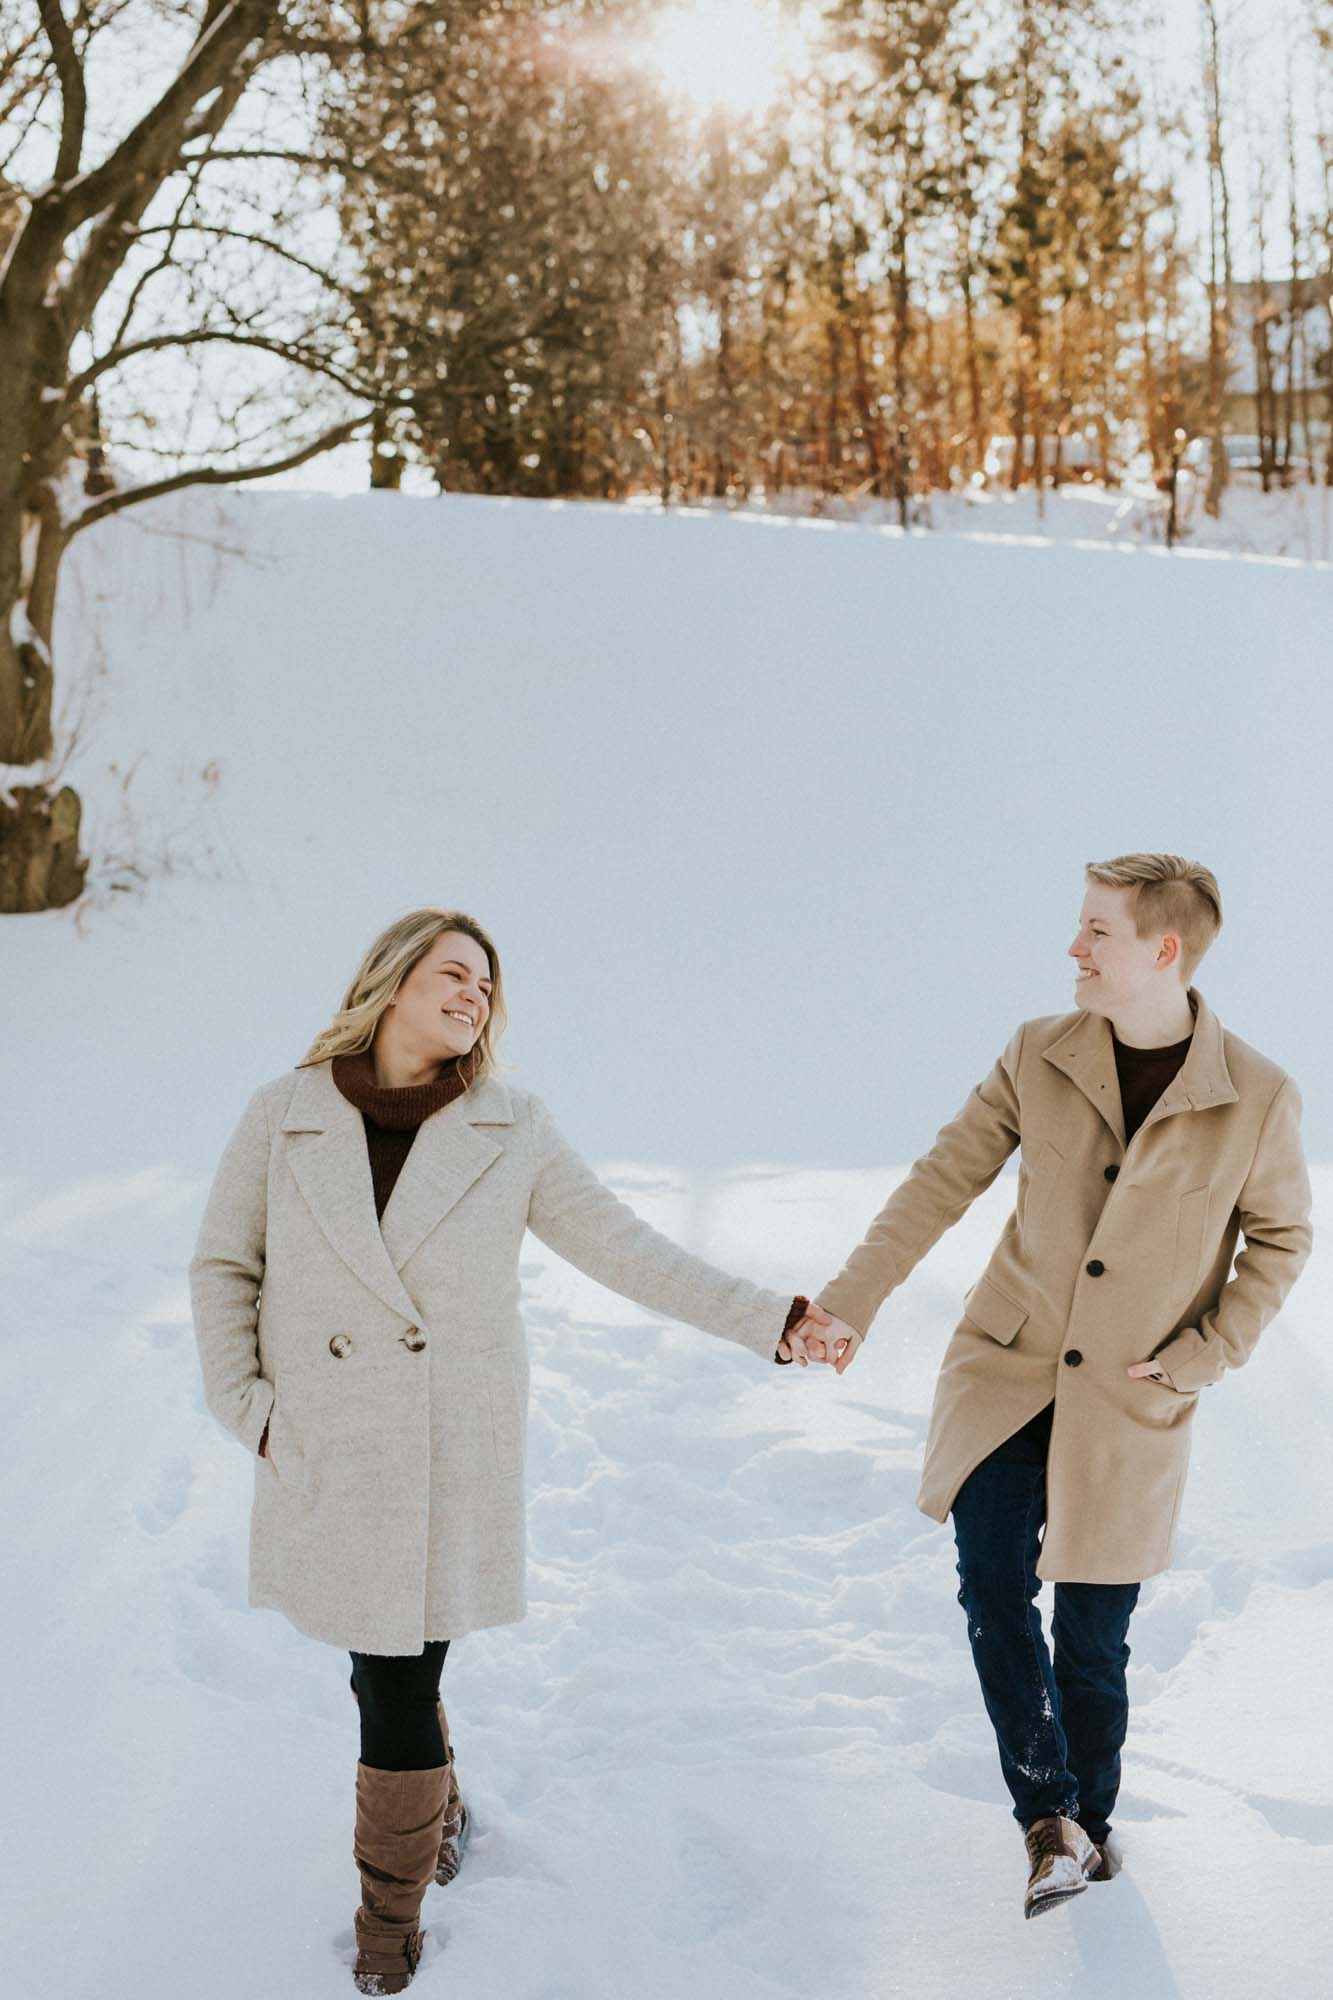 Snowy and sparkling gazebo proposal | Alisha Toole Photography | Featured on Equally Wed, the leading LGBTQ+ wedding magazine